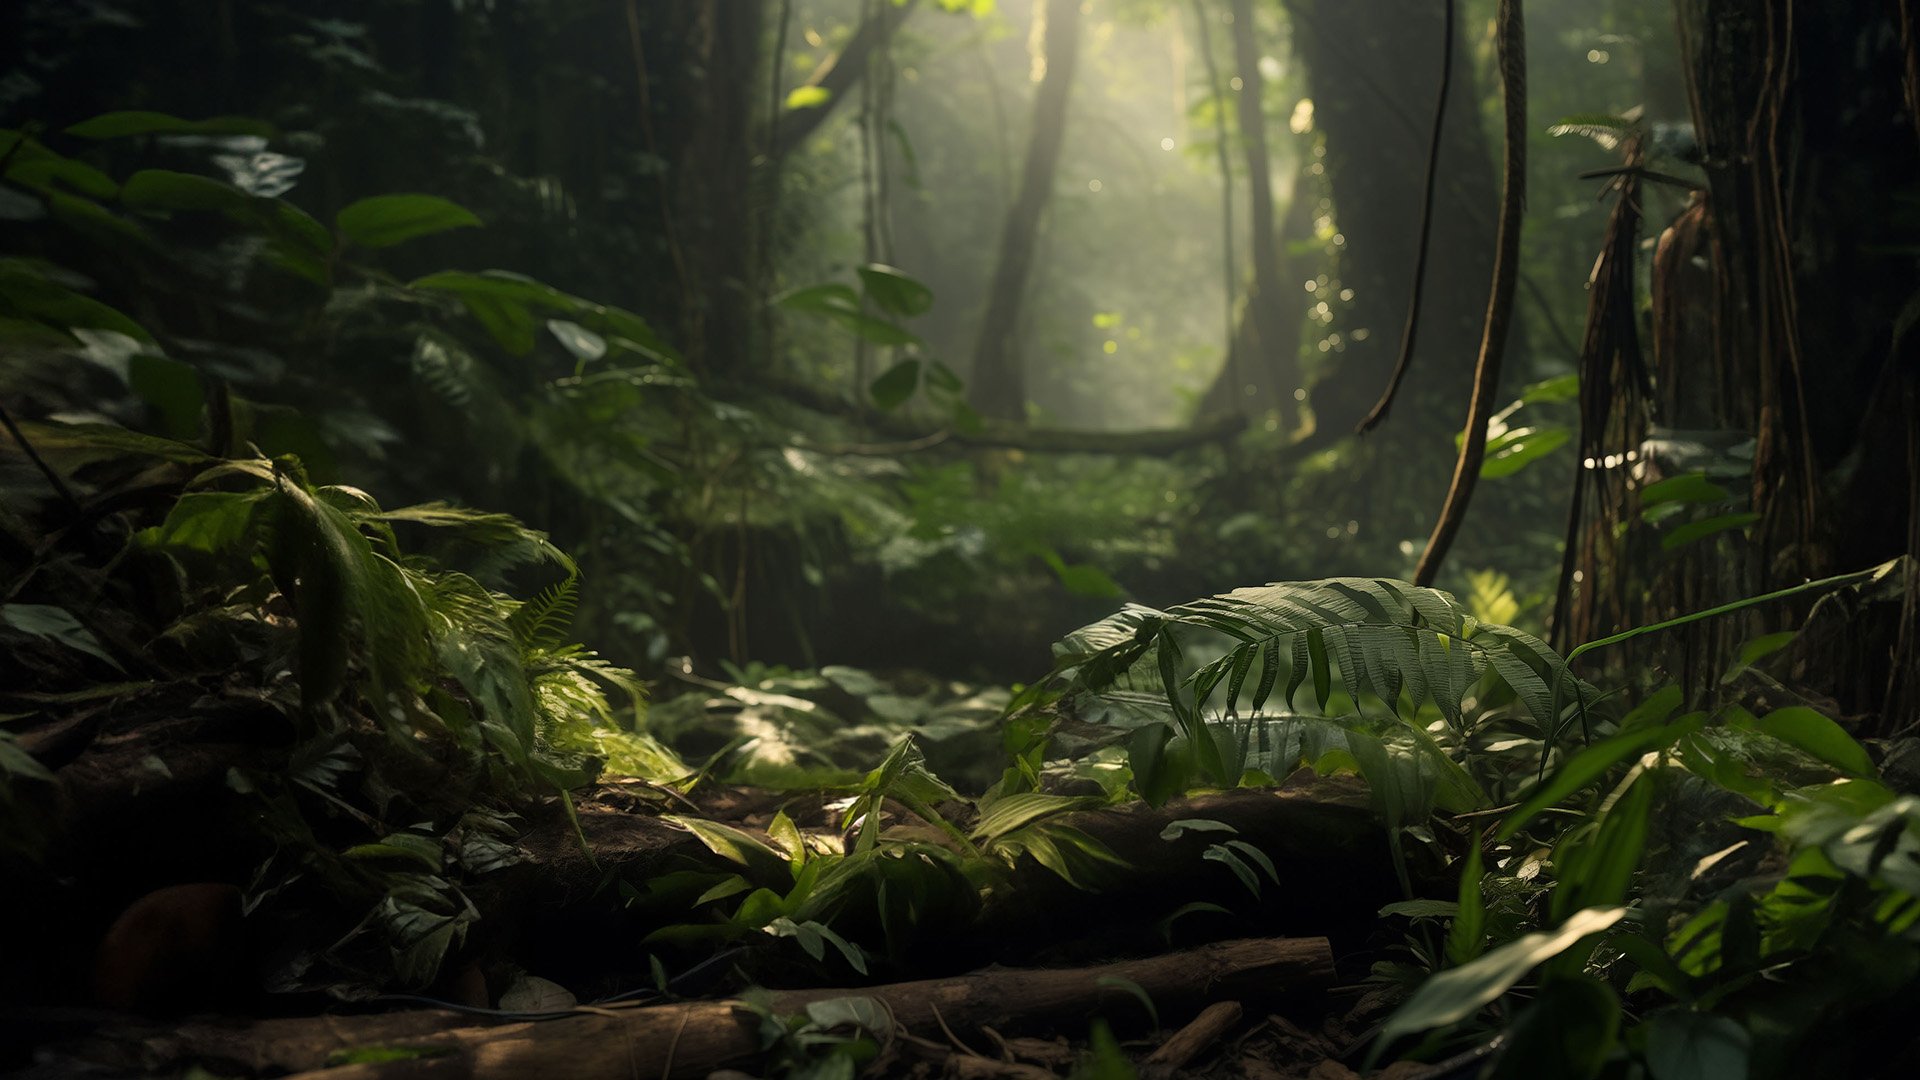 image of dim jungle setting with light filtering through trees